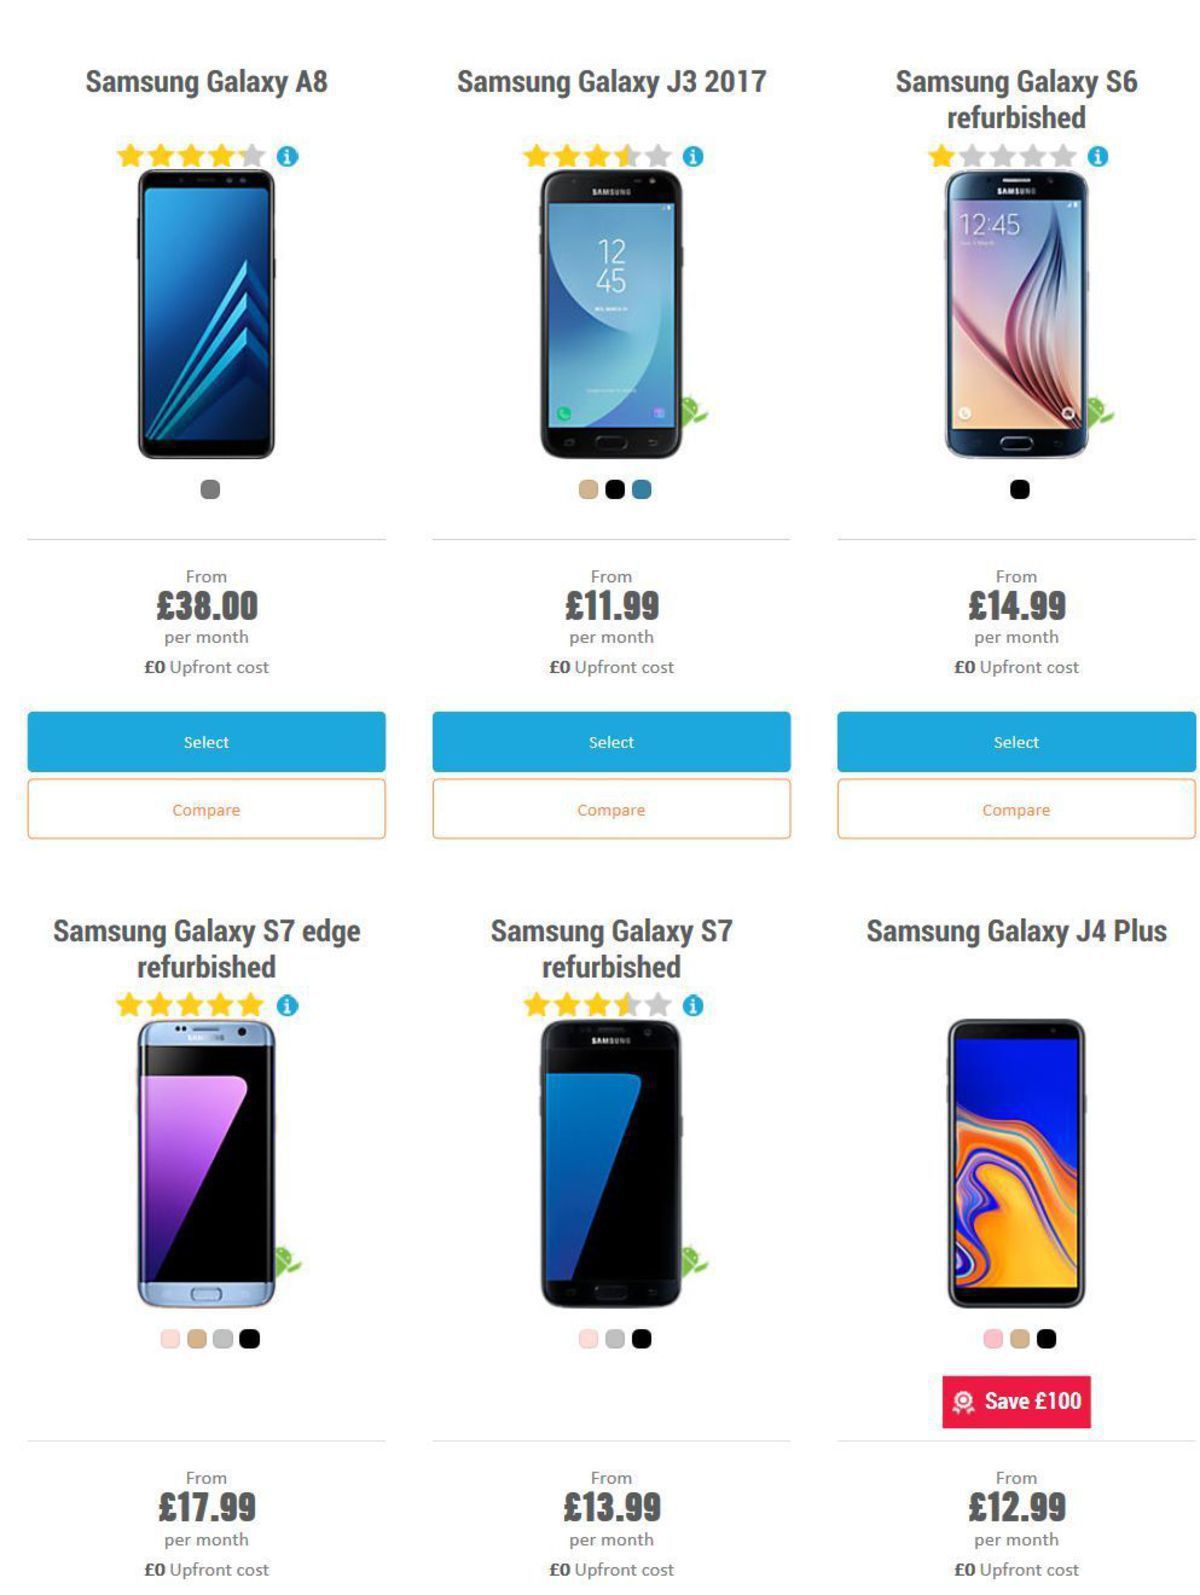 Carphone Warehouse Offers from 1 April